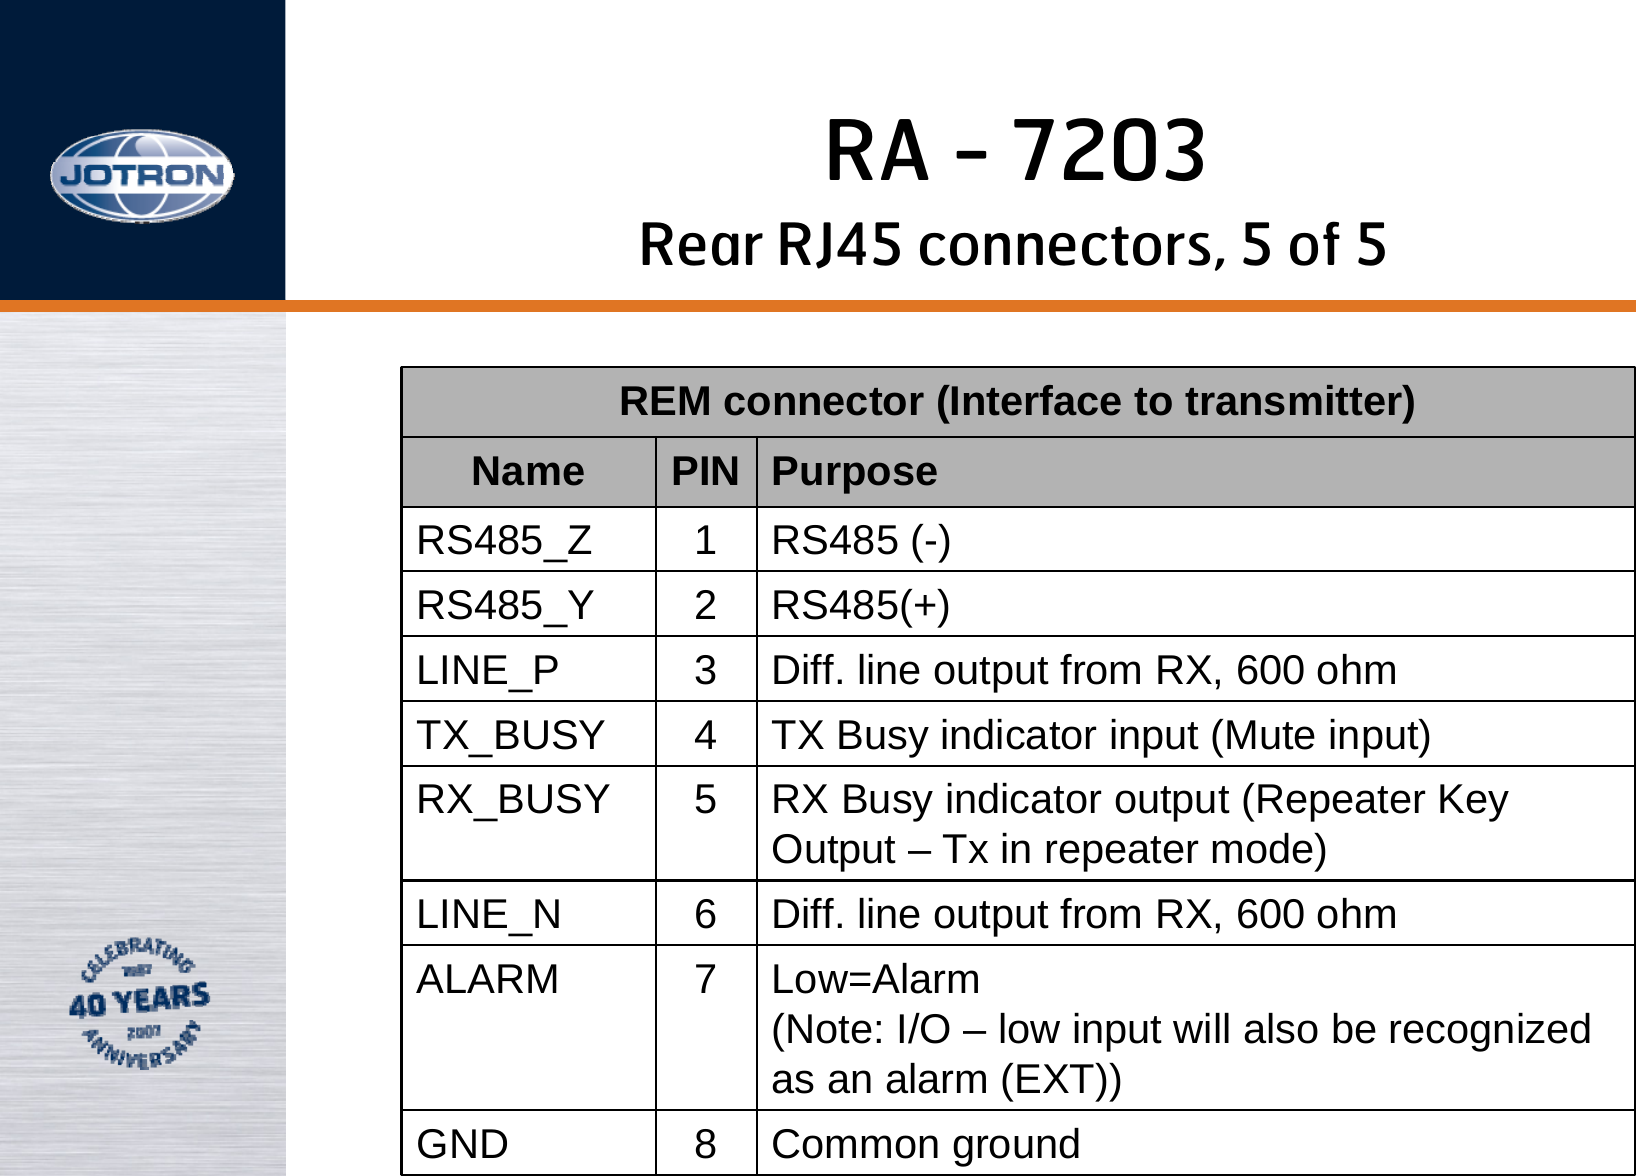 RA - 7203REM connector (Interface to transmitter)Name PIN PurposeRS485_Z 1RS485 (-)RS485_Y 2RS485(+)LINE_P 3Diff. line output from RX, 600 ohmTX_BUSY 4TX Busy indicator input (Mute input)RX_BUSY 5RX Busy indicator output (Repeater KeyOutput – Tx in repeater mode)LINE_N 6Diff. line output from RX, 600 ohmALARM 7Low=Alarm (Note: I/O – low input will also be recognizedas an alarm (EXT))GND 8Common ground Rear RJ45 connectors, 5 of 5